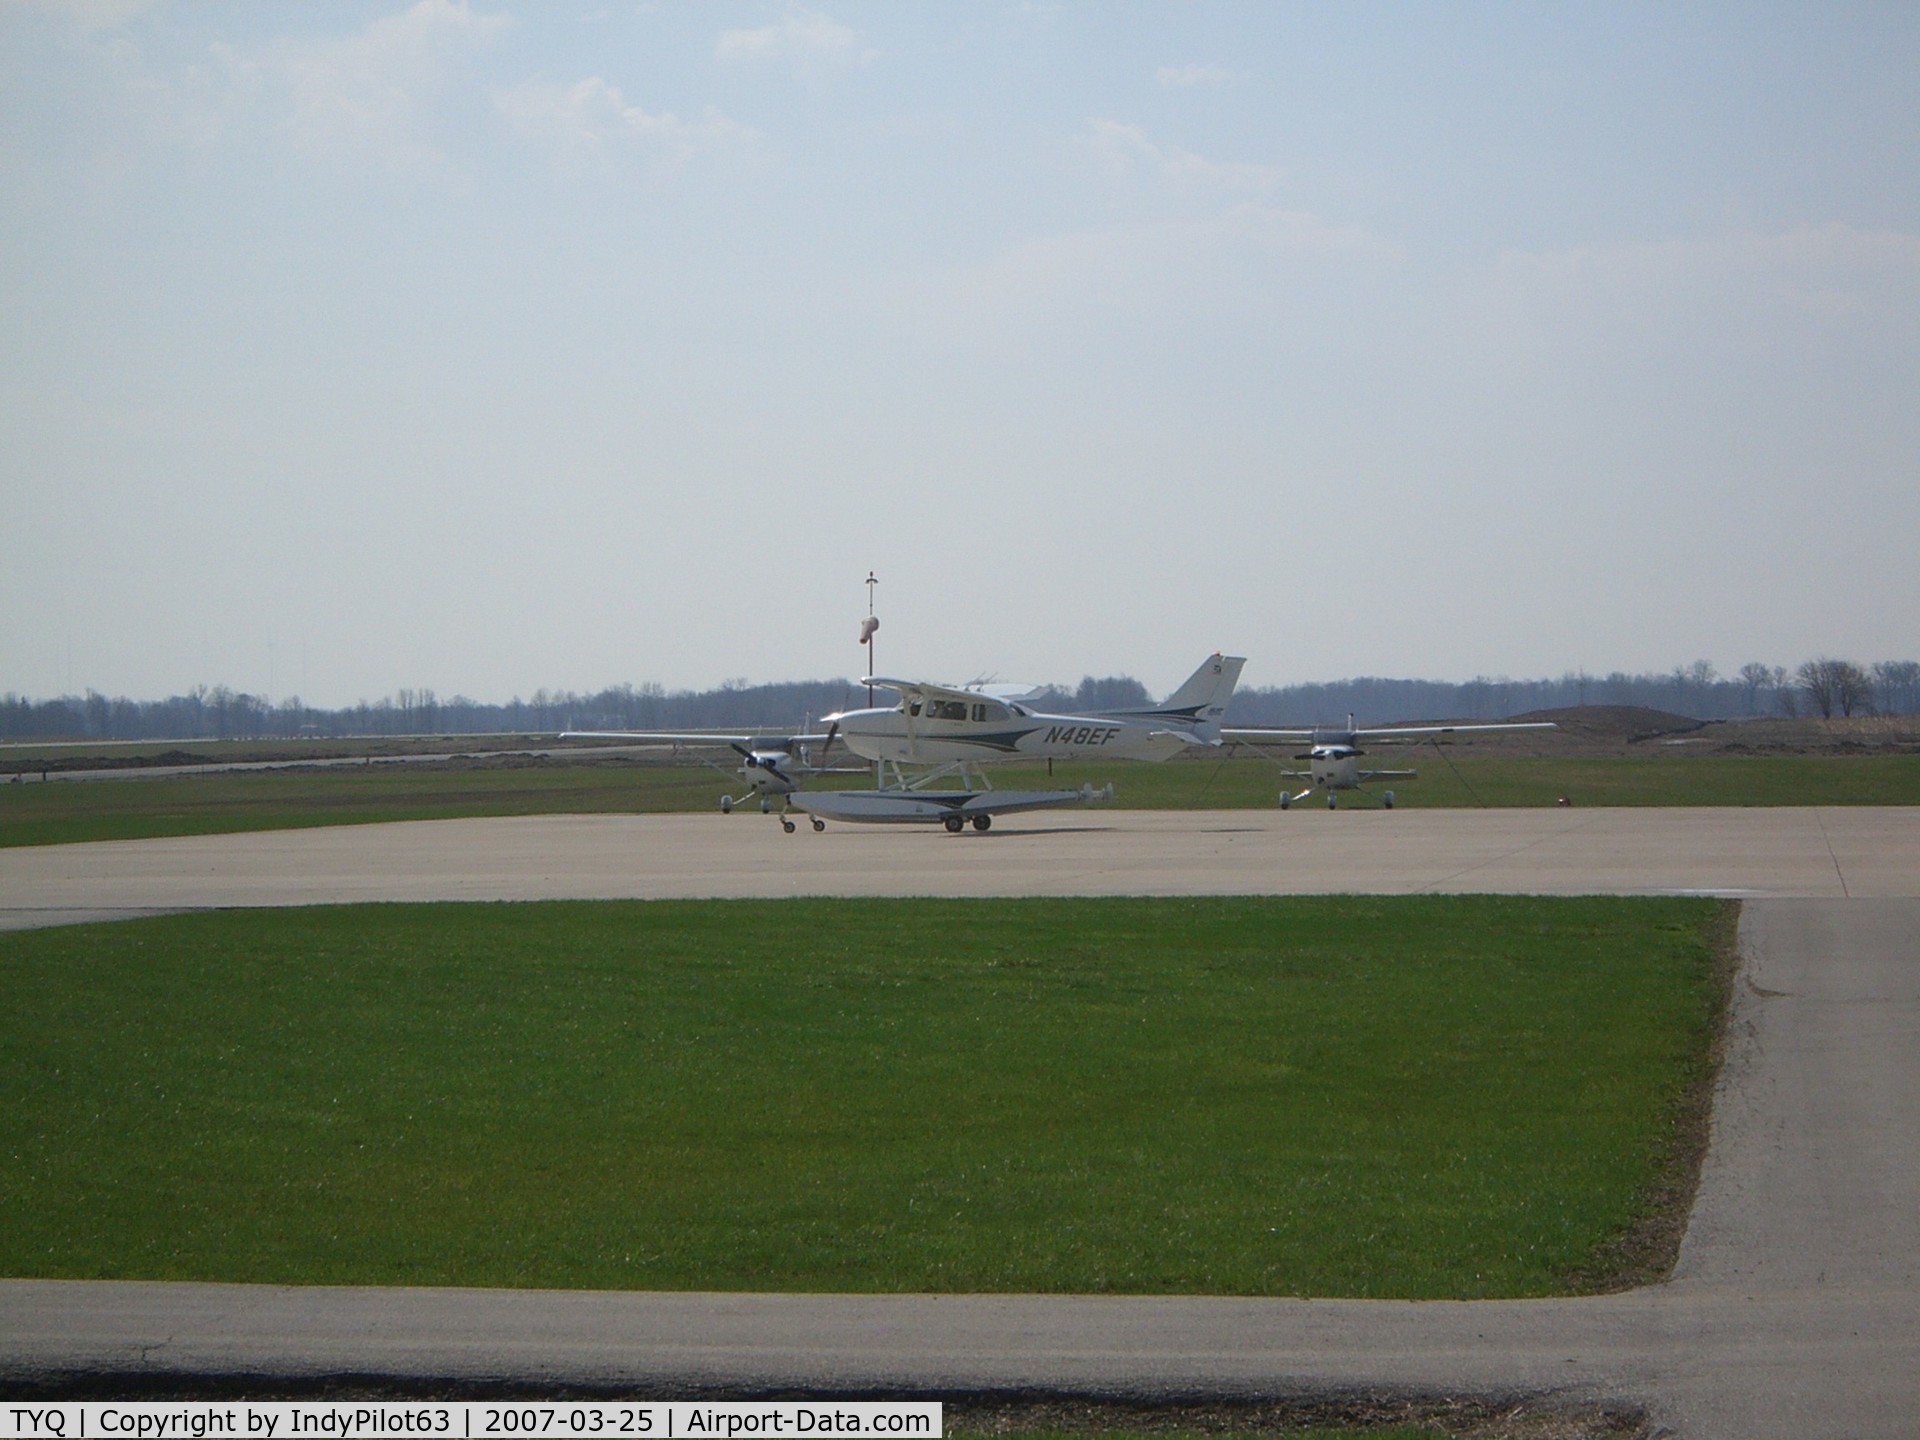 Indianapolis Executive Airport (TYQ) - Seaplane taxiing from tarmac